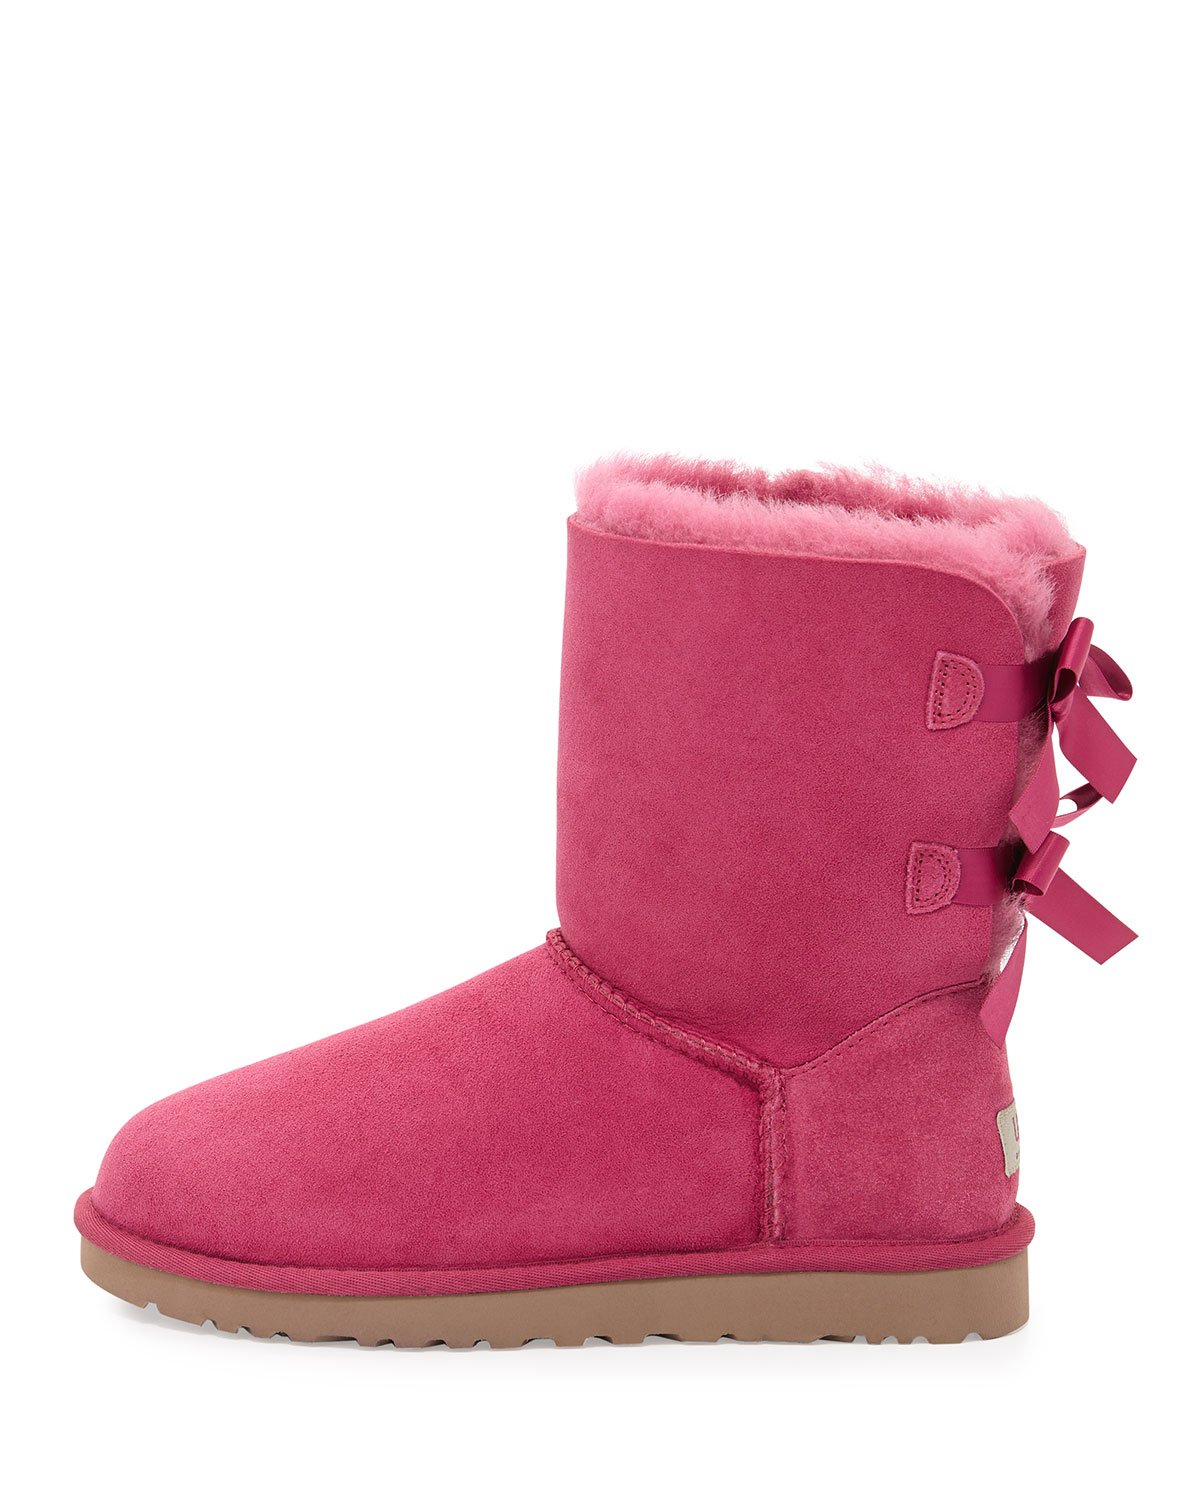 Ugg Bailey Bow-Back Short Boot in Pink (VICTORIAN PINK) | Lyst